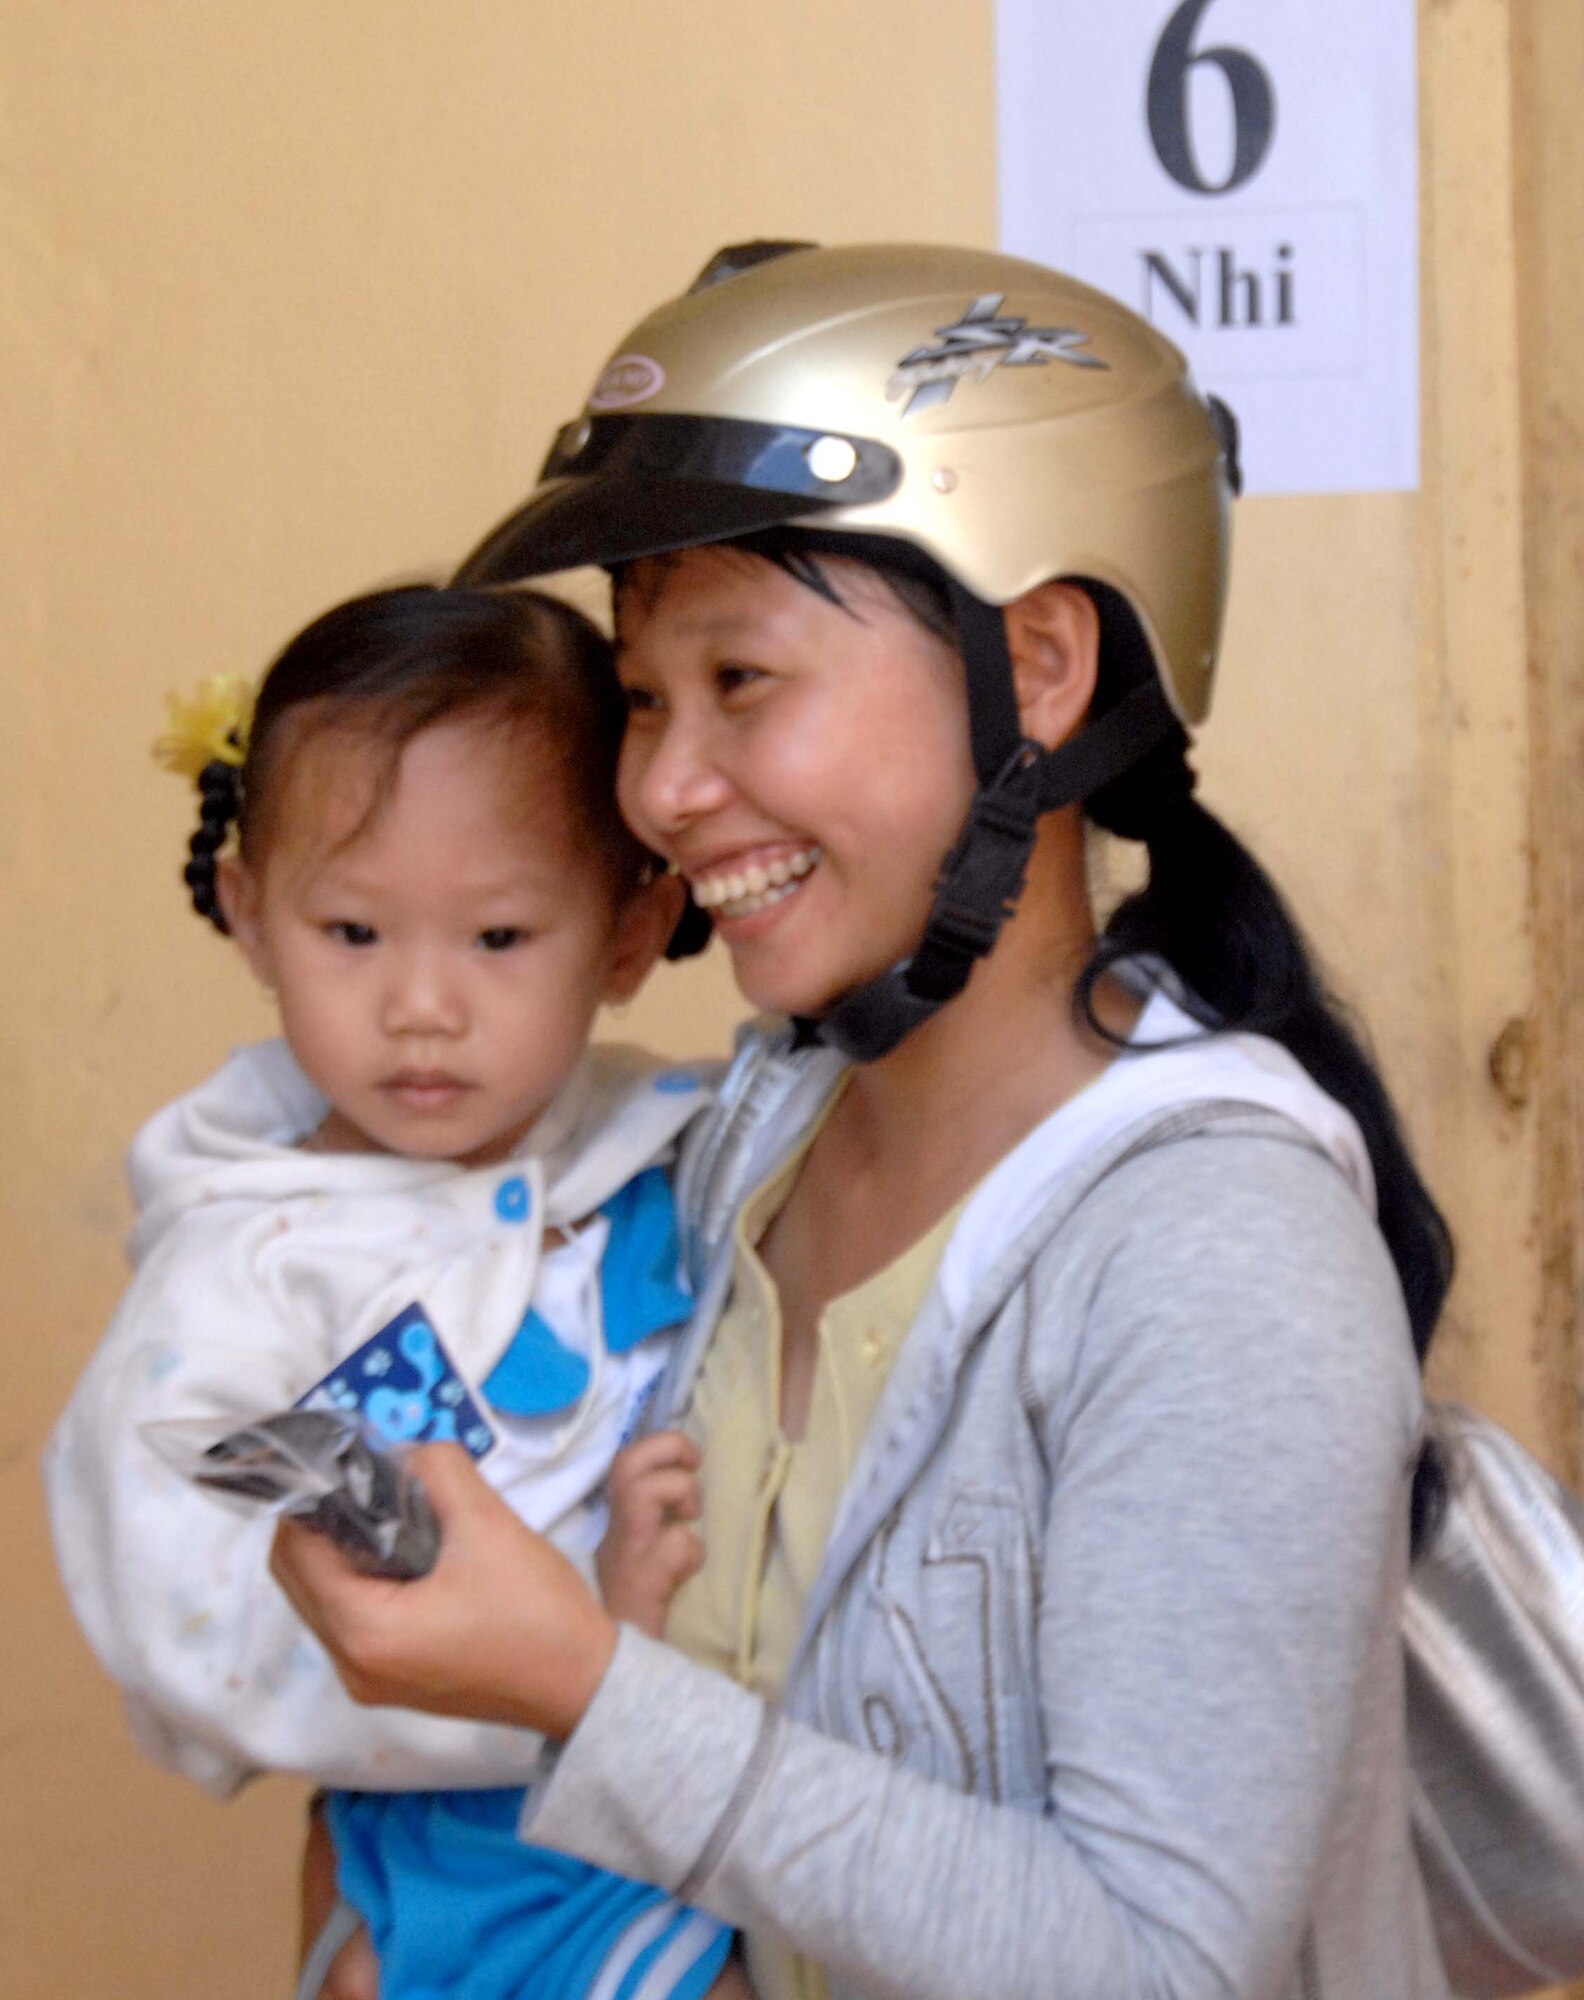 A woman and her daughter receive a free pair of glasses from the optometry clinic at the medical clinic set up at Truong Thanh, Vietnam as part of Pacific Angel 10-2 May 13. Operation Pacific Angel is a joint and combined humanitarian and civic assistance operation conducted in the Pacific area of responsibility to support U.S. Pacific Command's capacity-building efforts. More than 50 U.S. military members are working alongside the Vietnamese military, non-governmental organizations and civil health personnel in medical and engineering efforts during the mission scheduled through May 15. (U.S. Air Force photo/Capt. Timothy Lundberg)